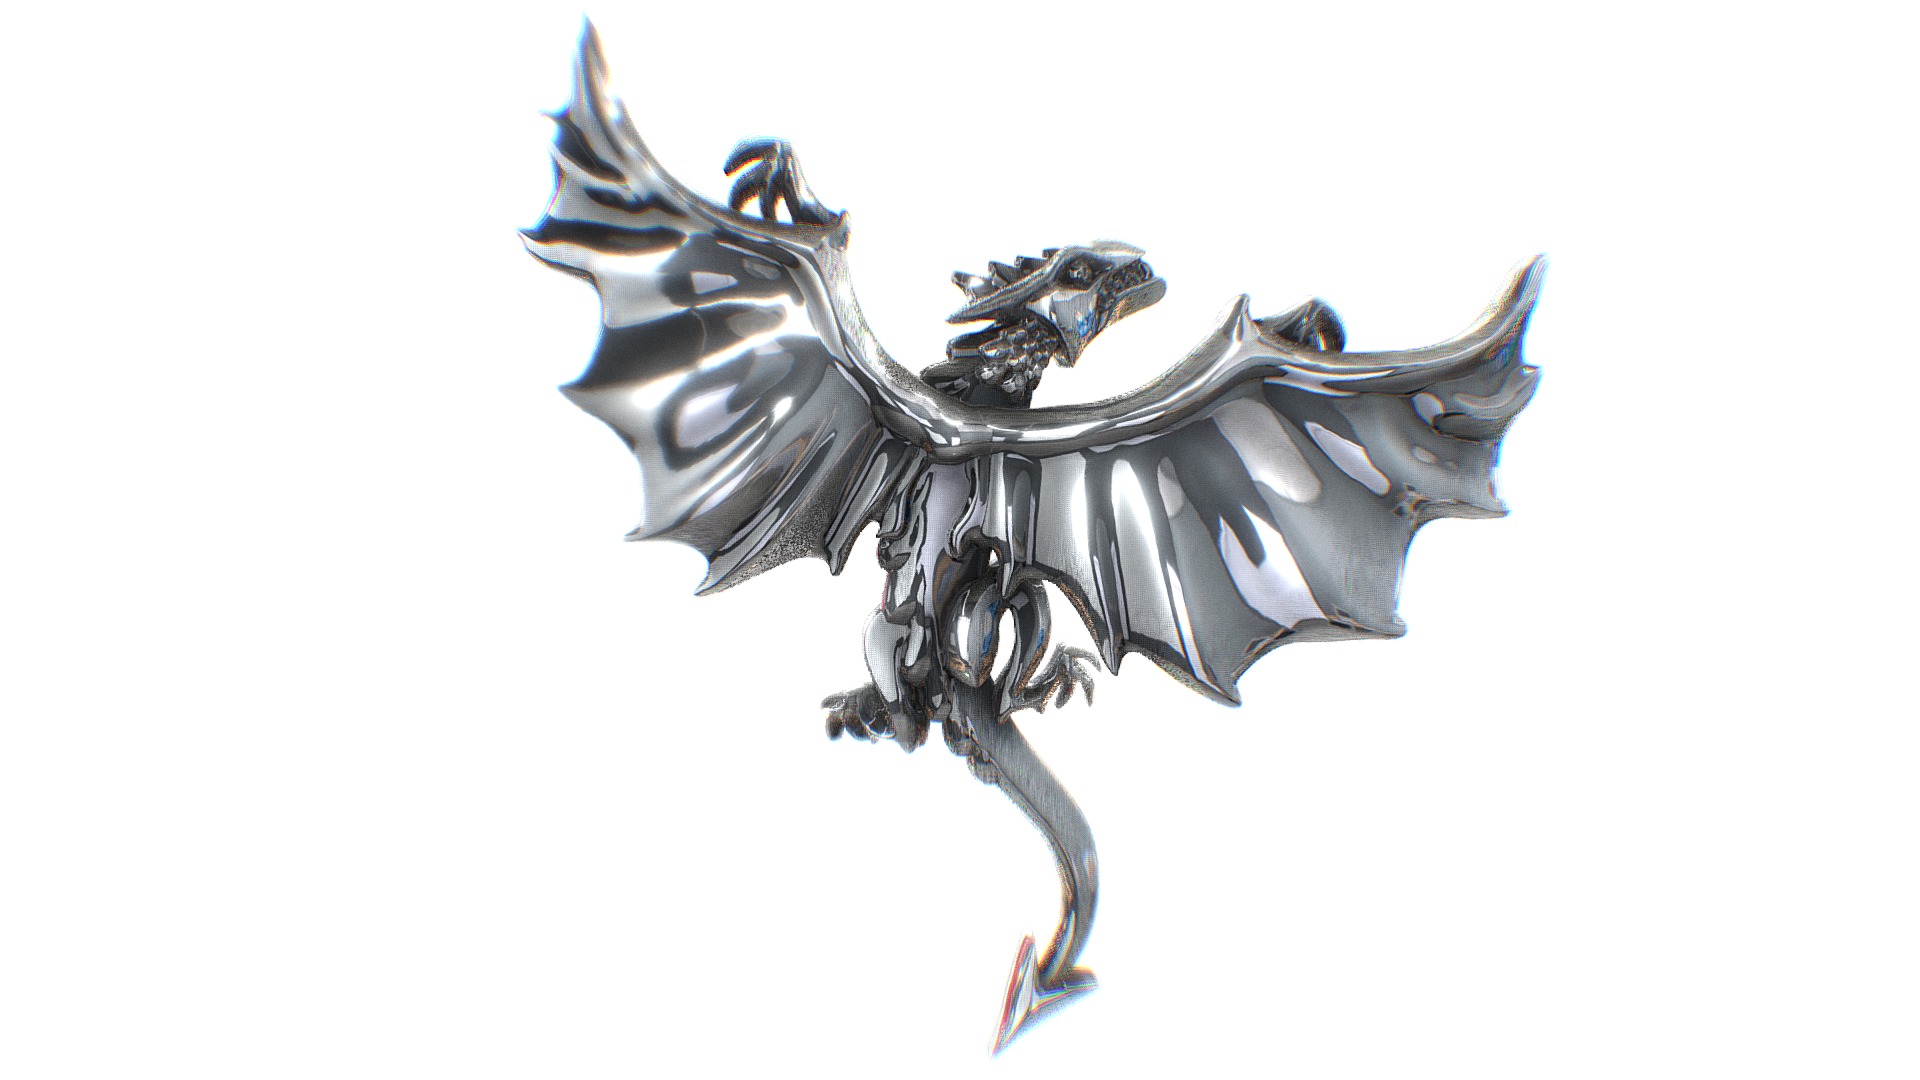 3D model Dragon Rage - This is a 3D model of the Dragon Rage. The 3D model is about a metal dragon with wings.